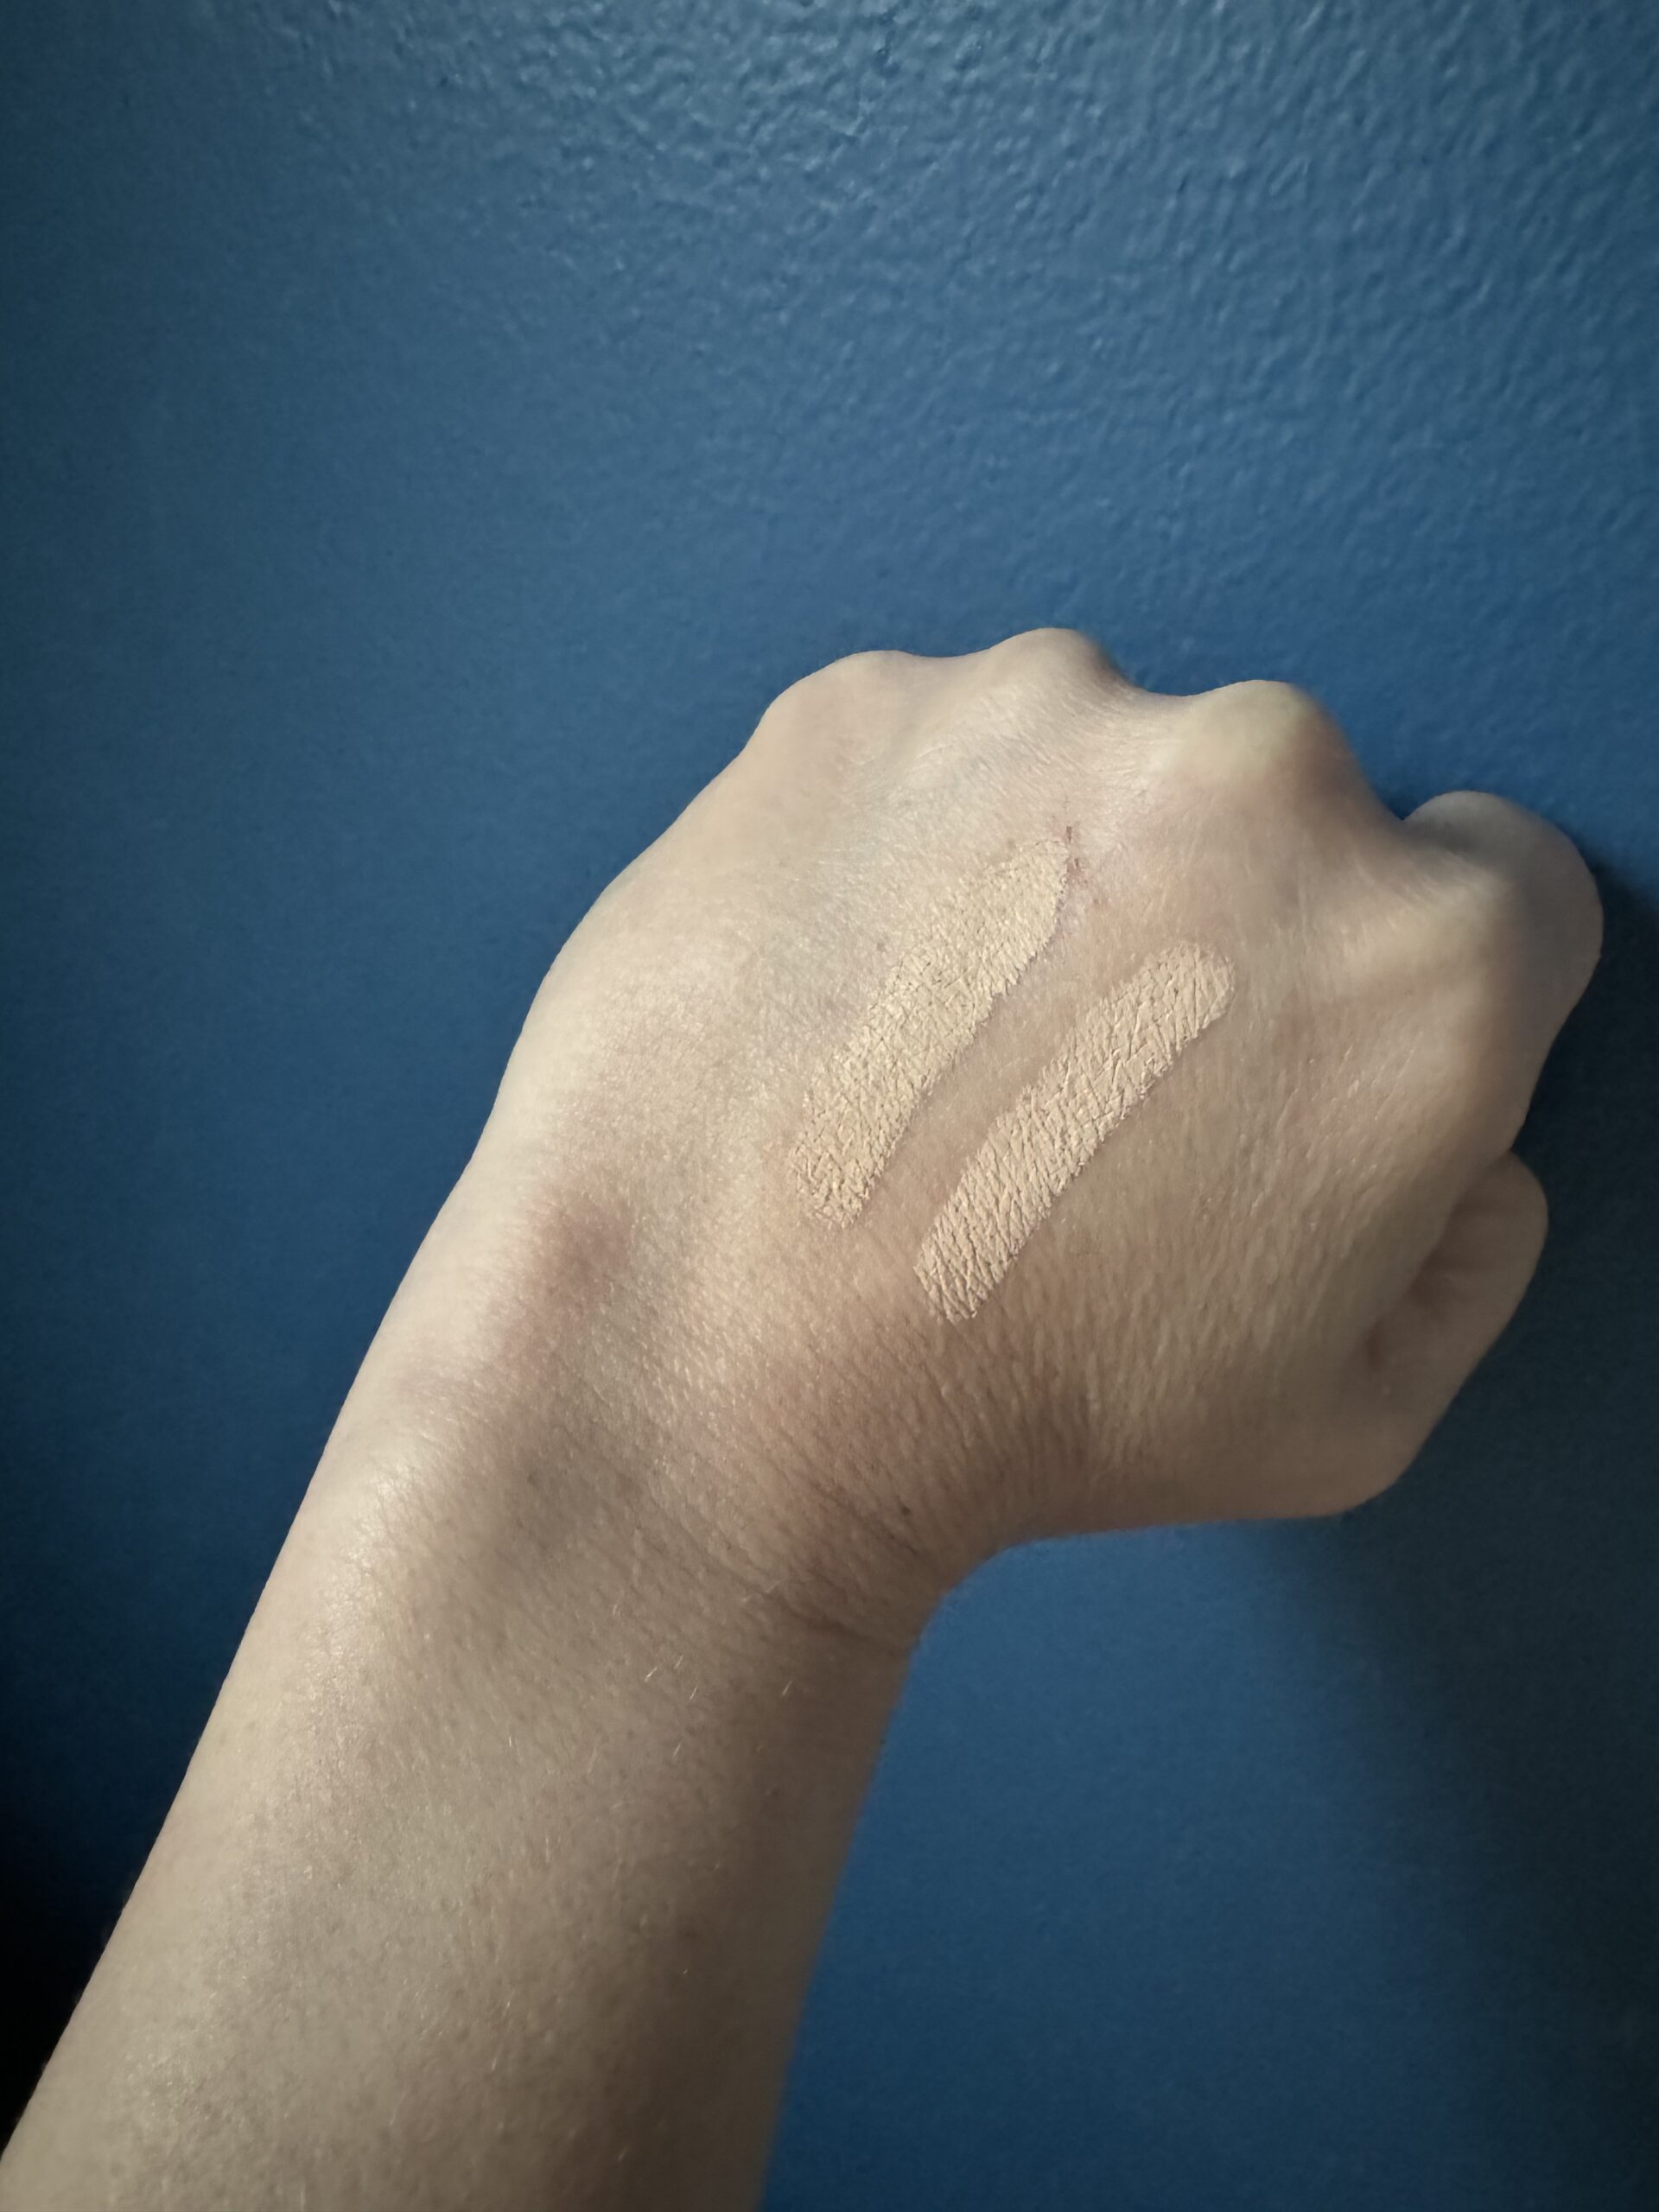 Swatches of two shades of foundation makeup applied to a wrist against a blue background.